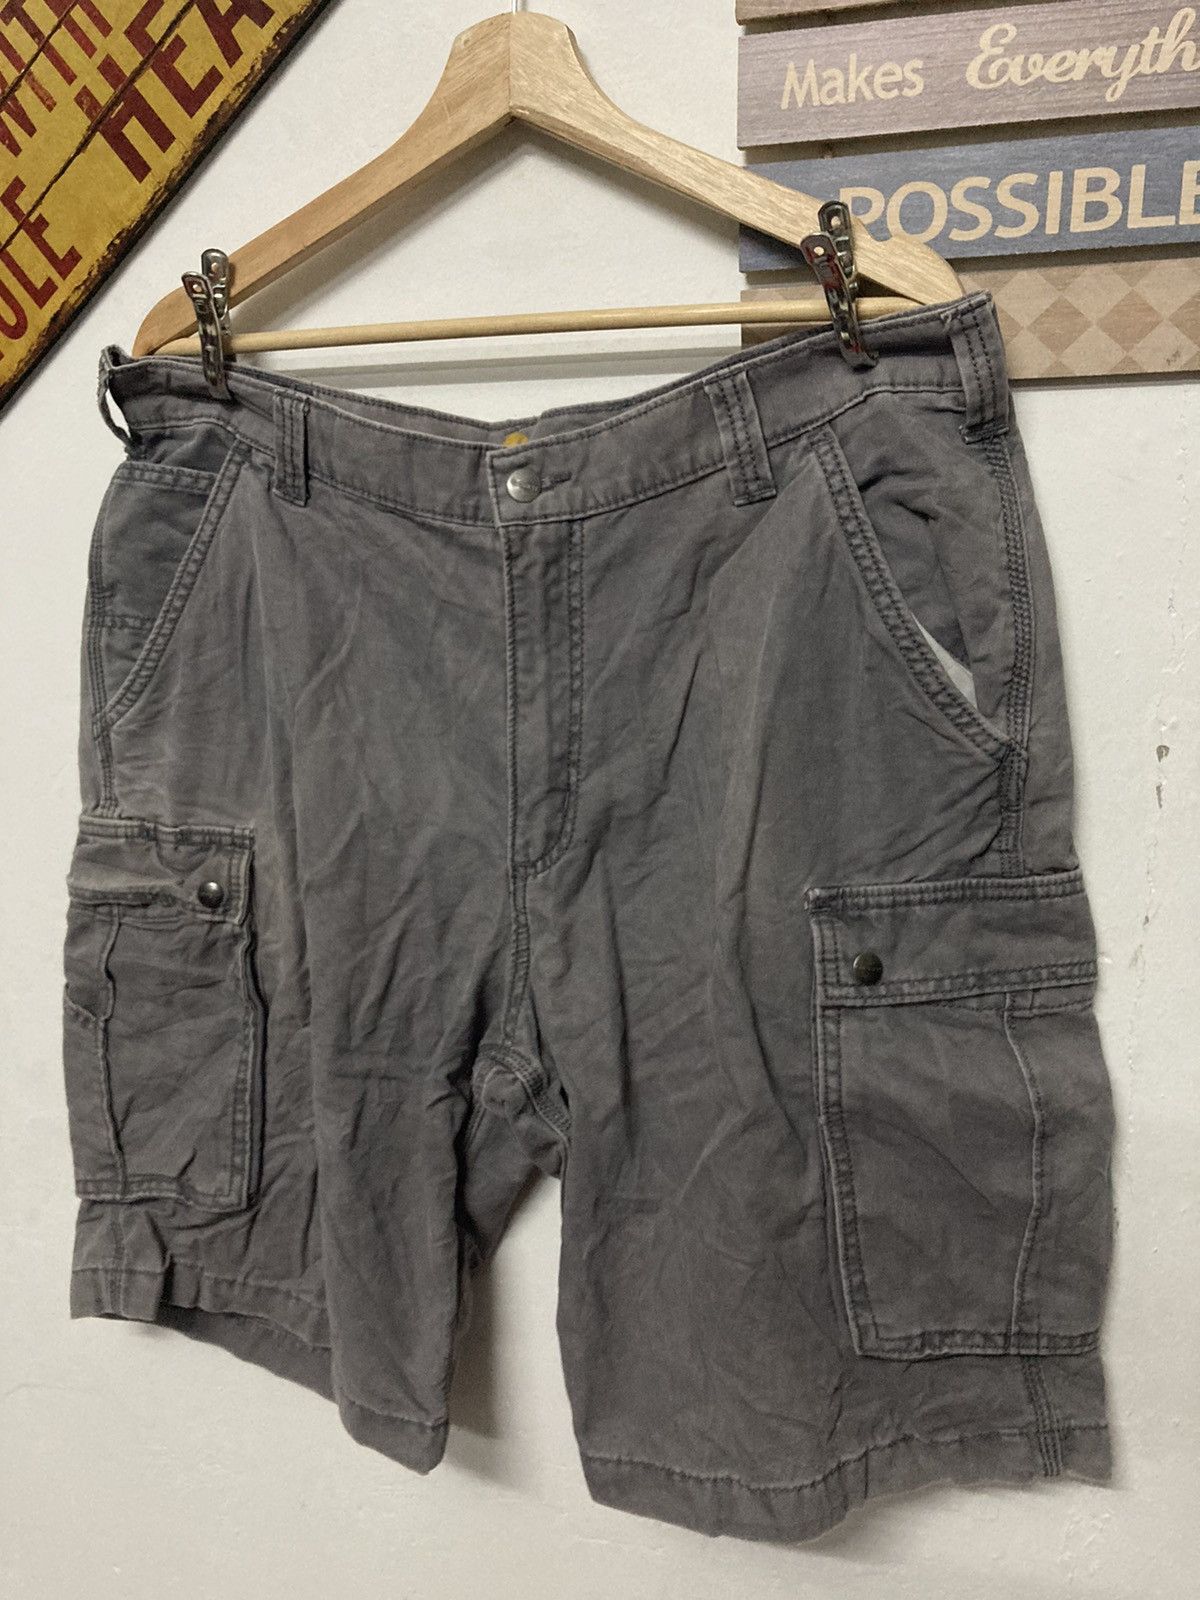 Vintage - Carhatt Relaxed Fit Cargo Short Pant Size 38 - 4